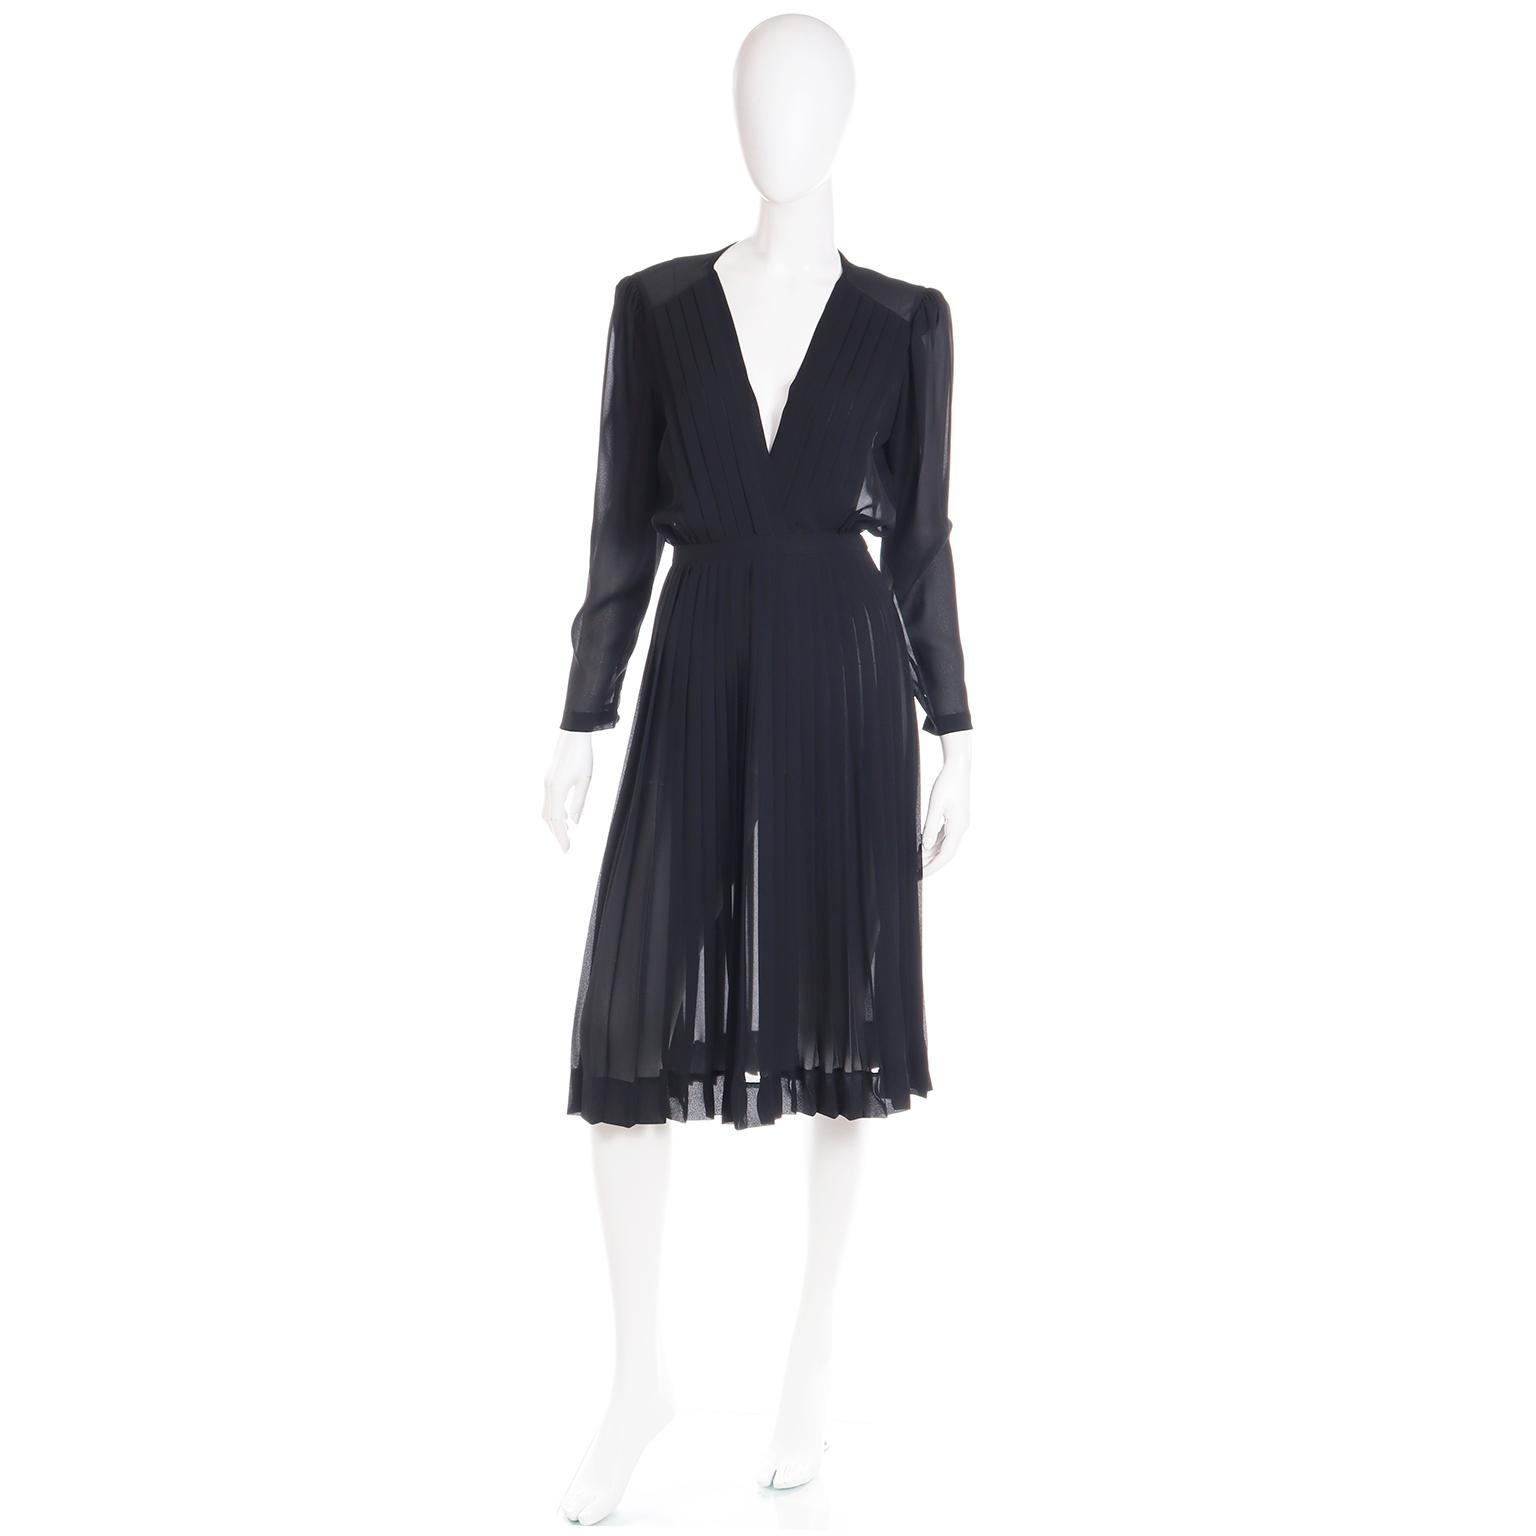 We have always loved vintage Albert Nipon dresses. Designed by his wife Pearl, they are just as relevant today as they were in the 1970's and 1980's when they were made! We love that most Albert Nipon dresses can be worn in the day or evening